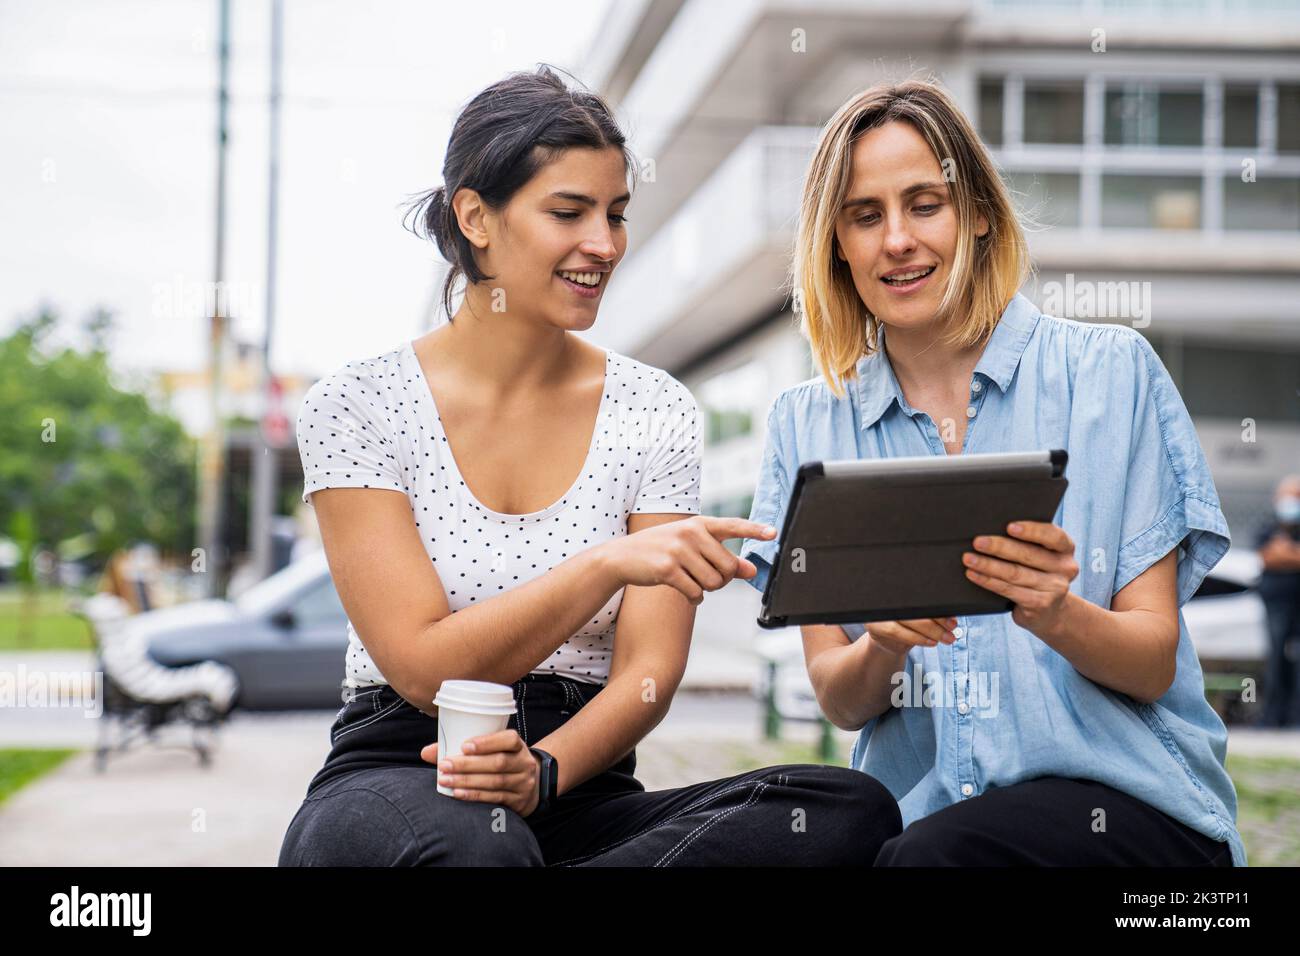 Front view shot of two female digital nomads working outdoors Stock Photo